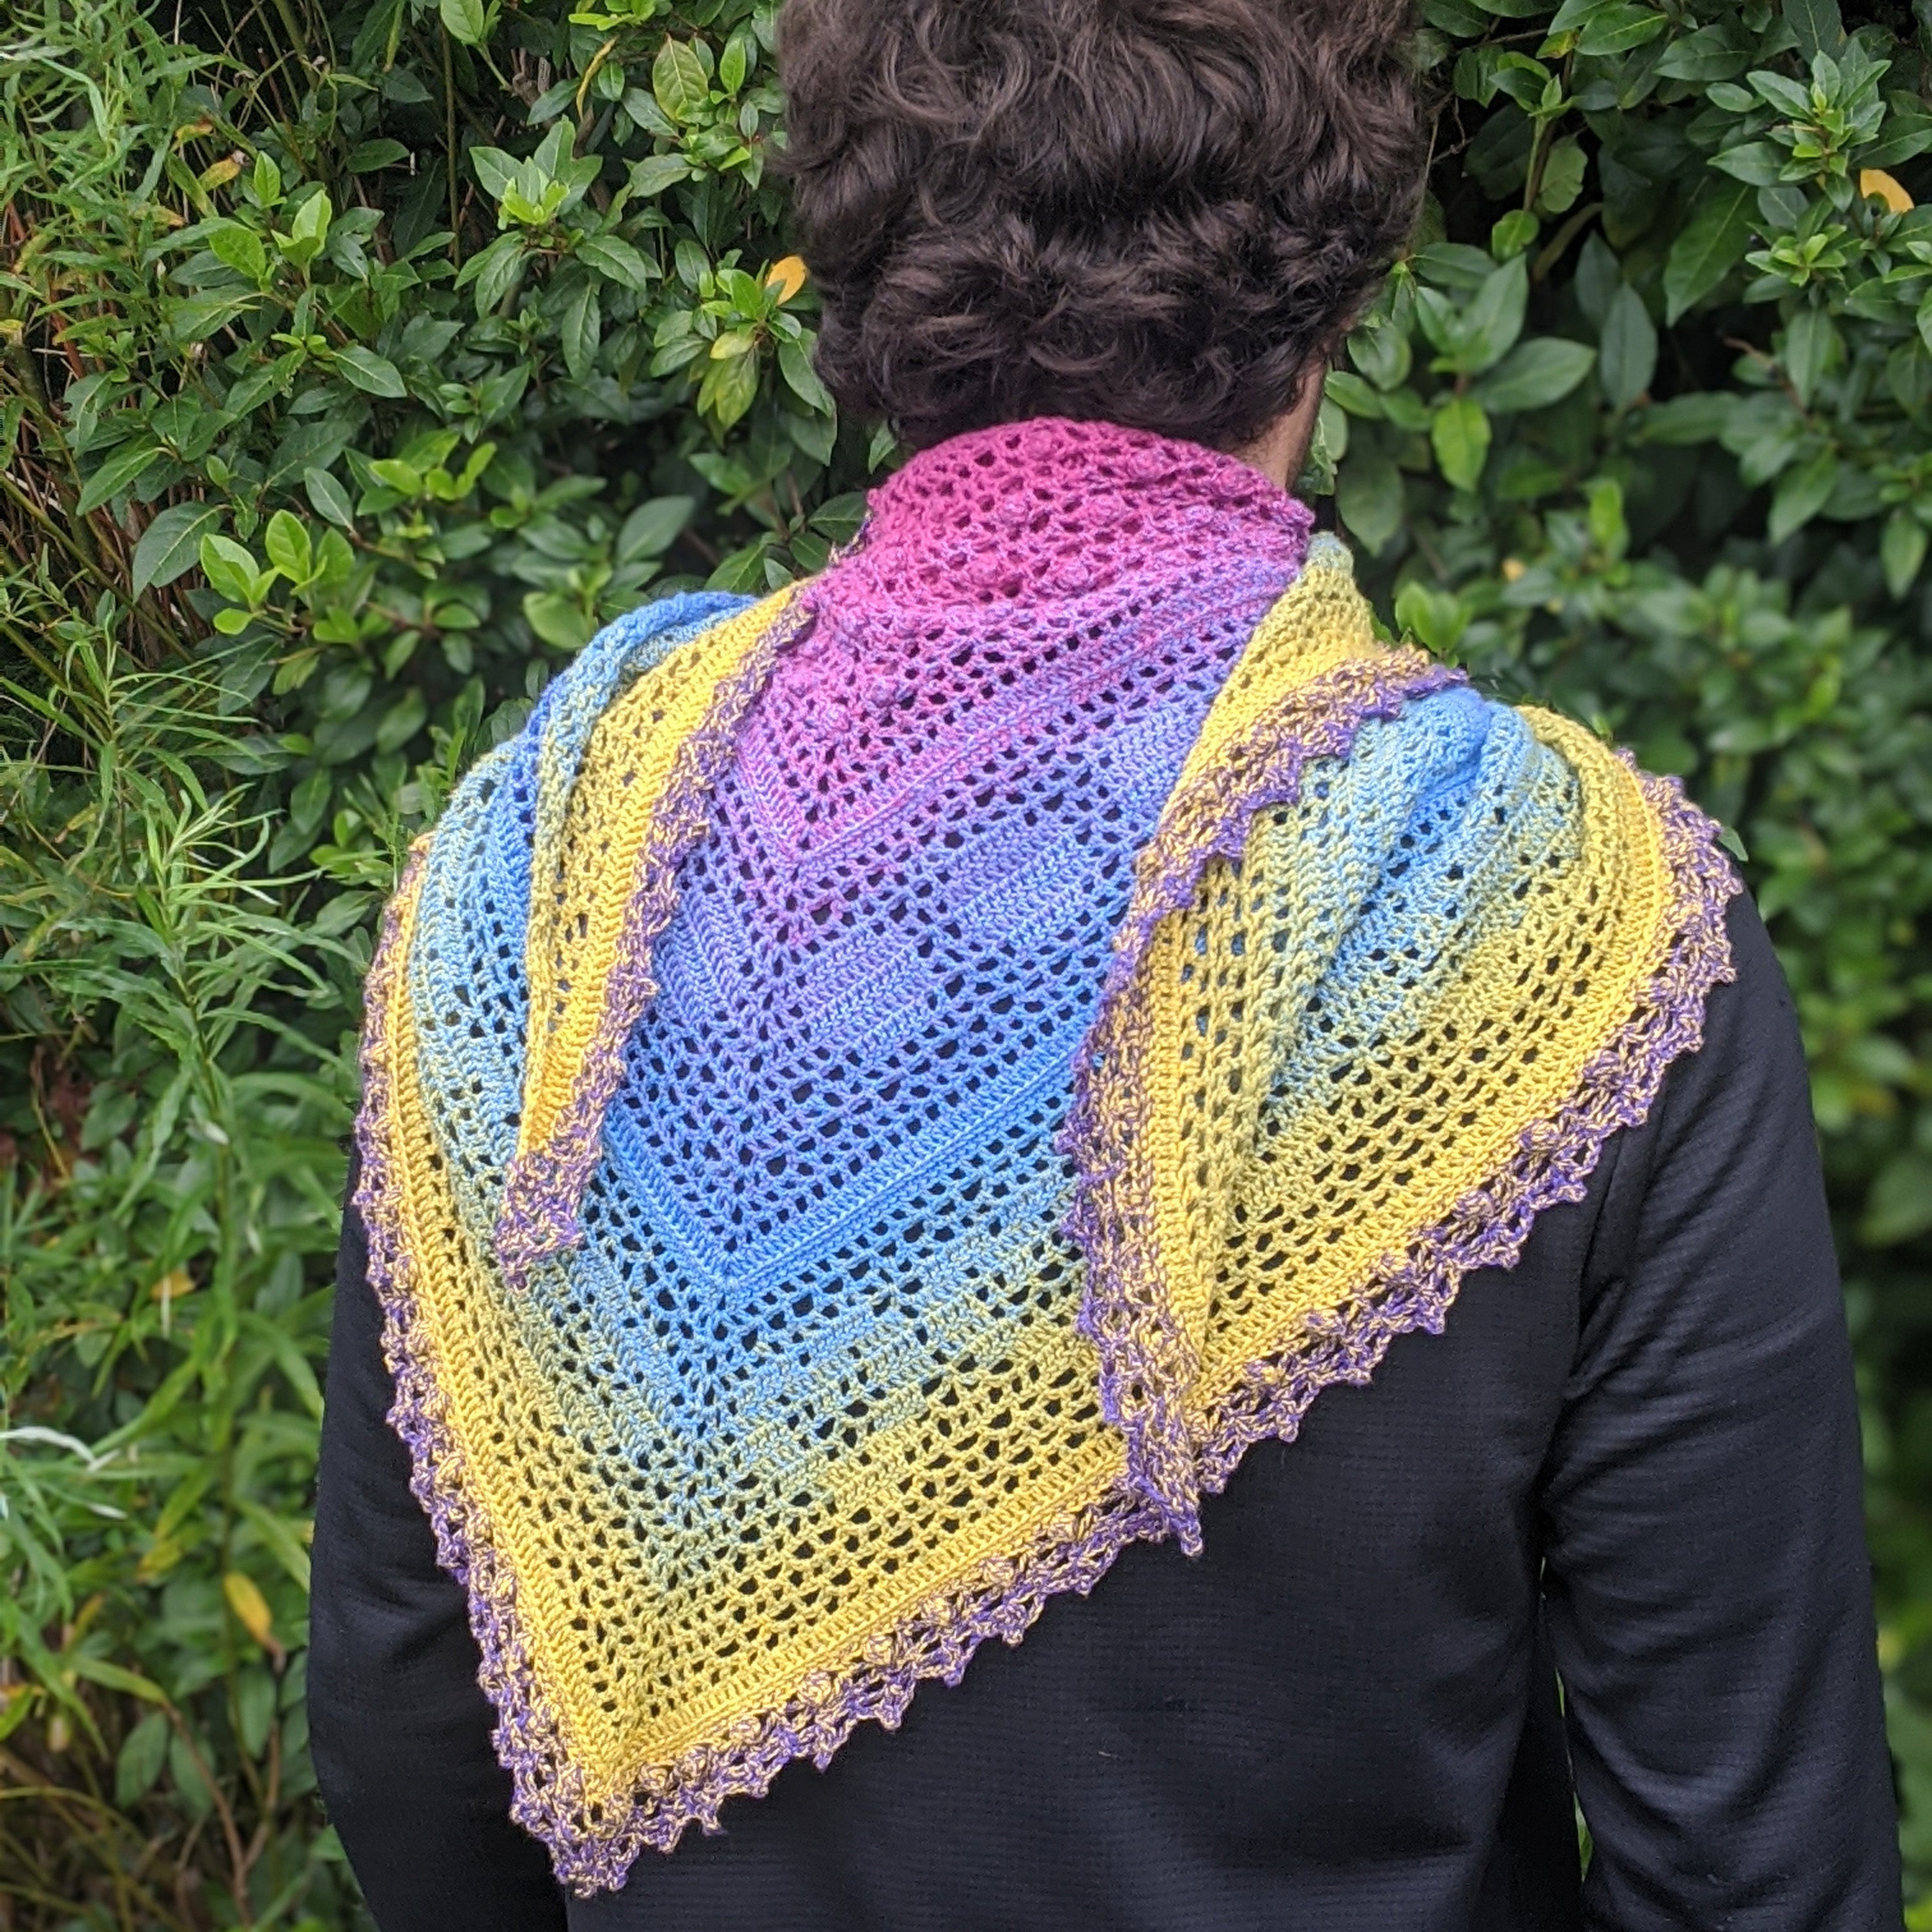 Grinda Crochet Shawl - Join in our latest Make Along